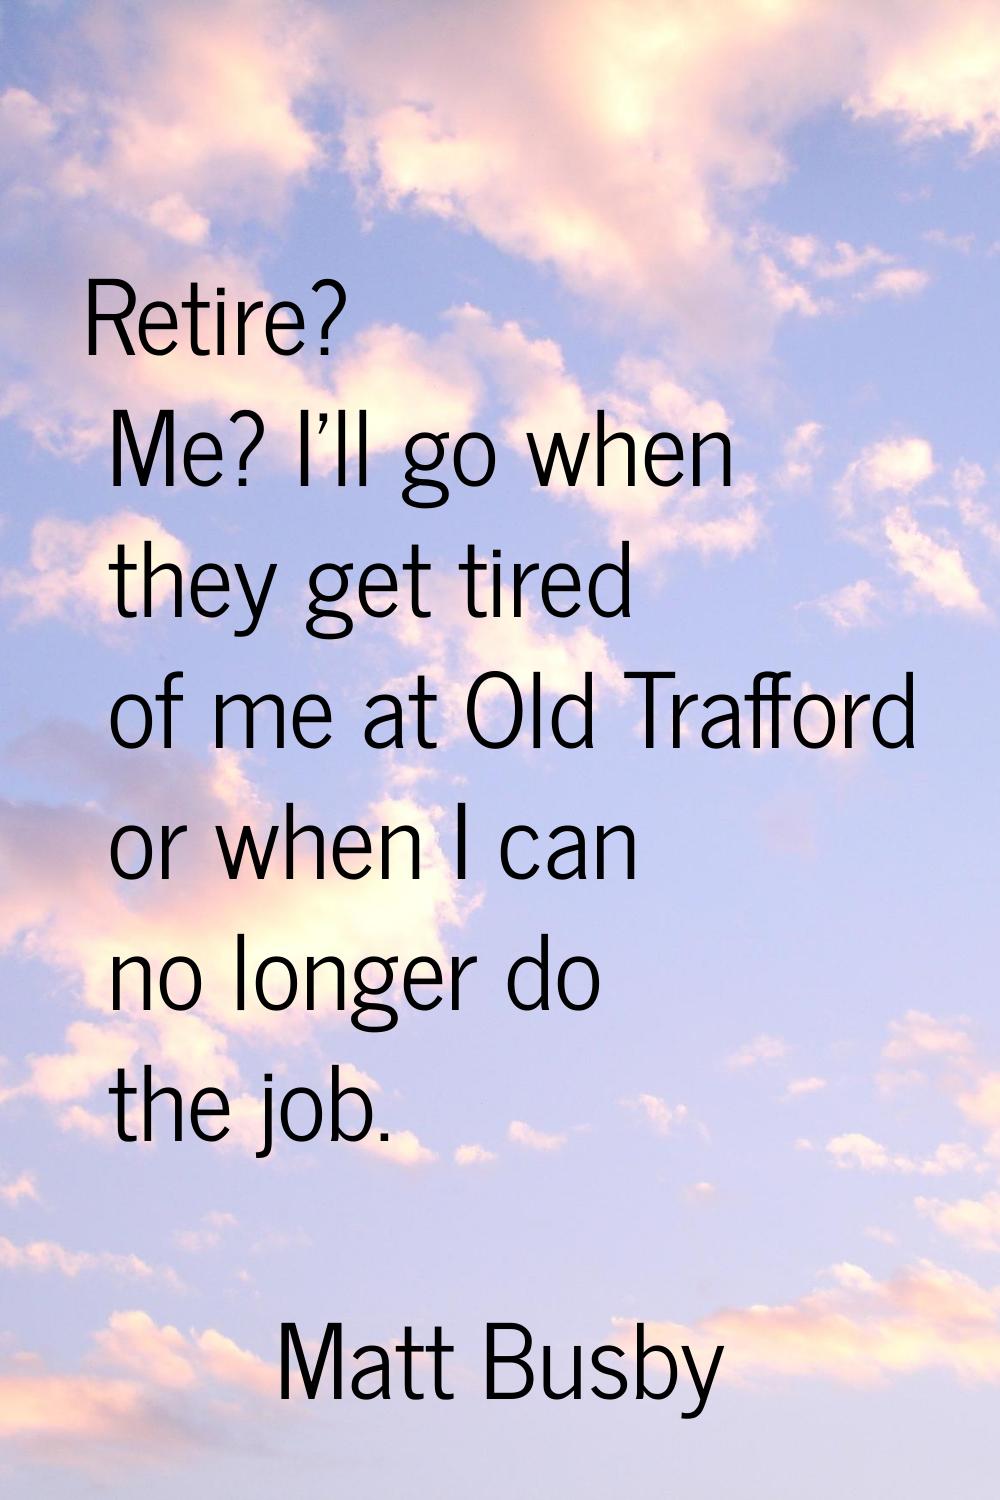 Retire? Me? I'll go when they get tired of me at Old Trafford or when I can no longer do the job.